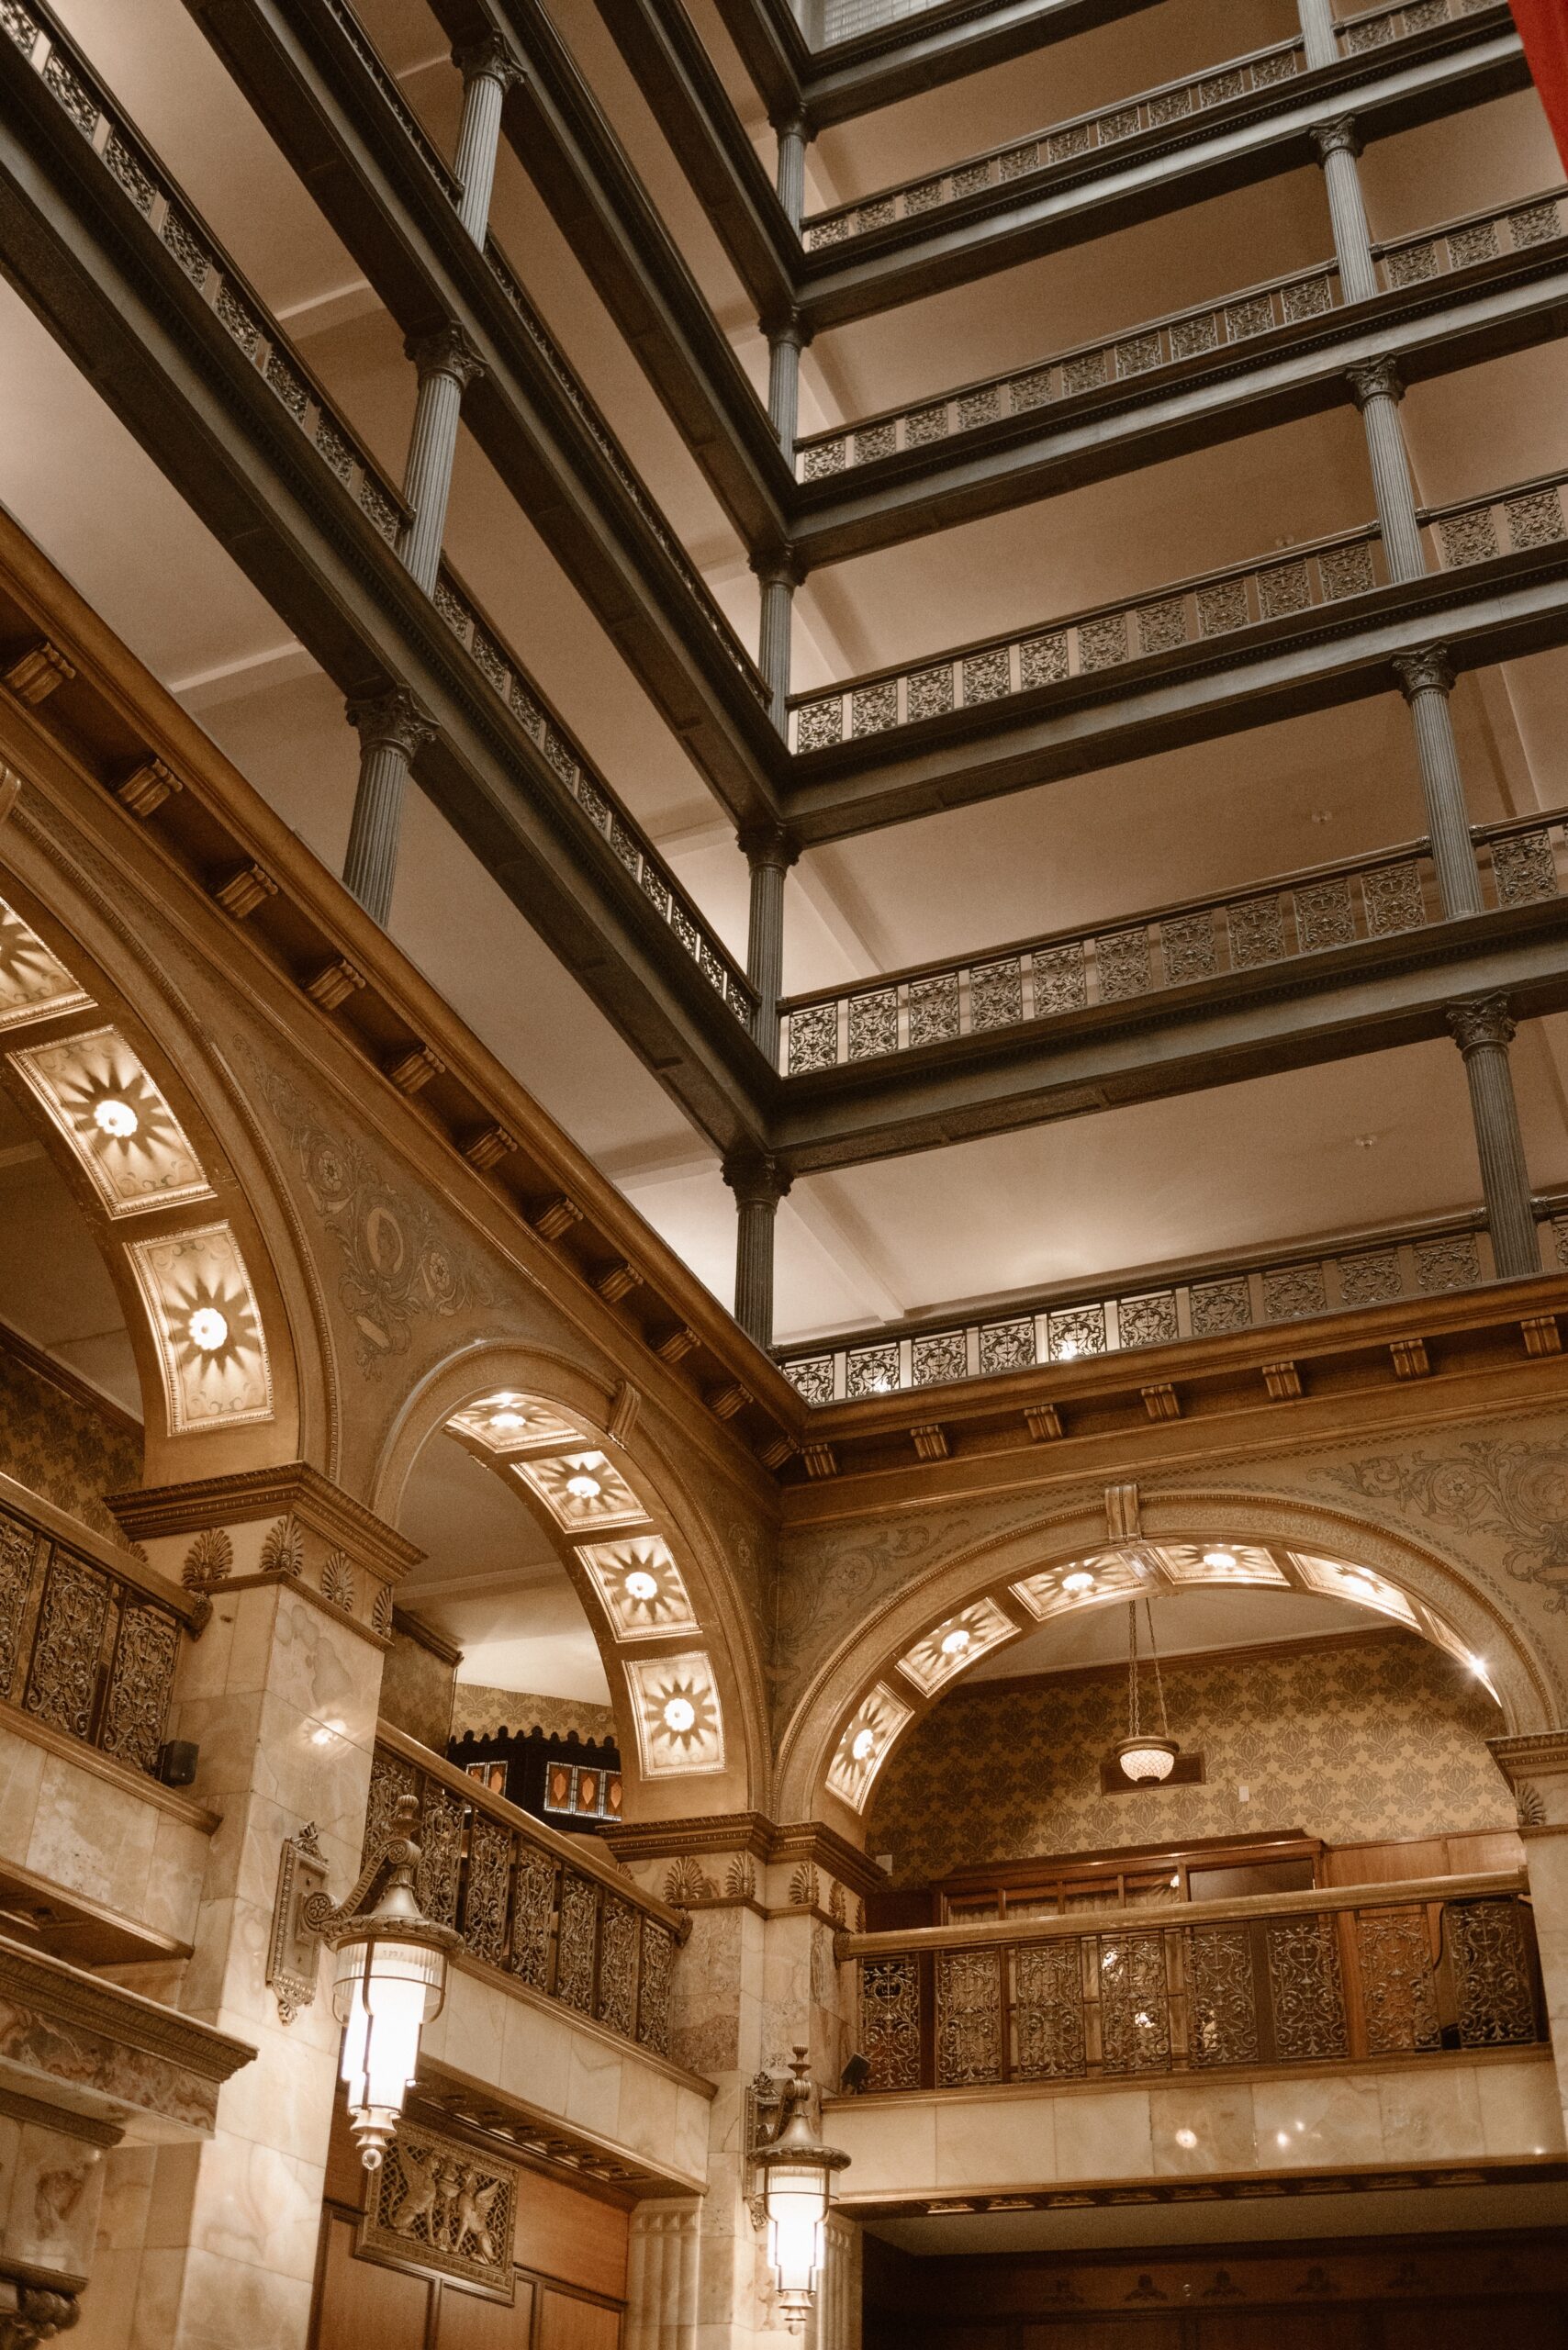 Architecture detail of the Brown Palace in Denver, Colorado. Photo by Denver wedding photographer Ashley Joyce.